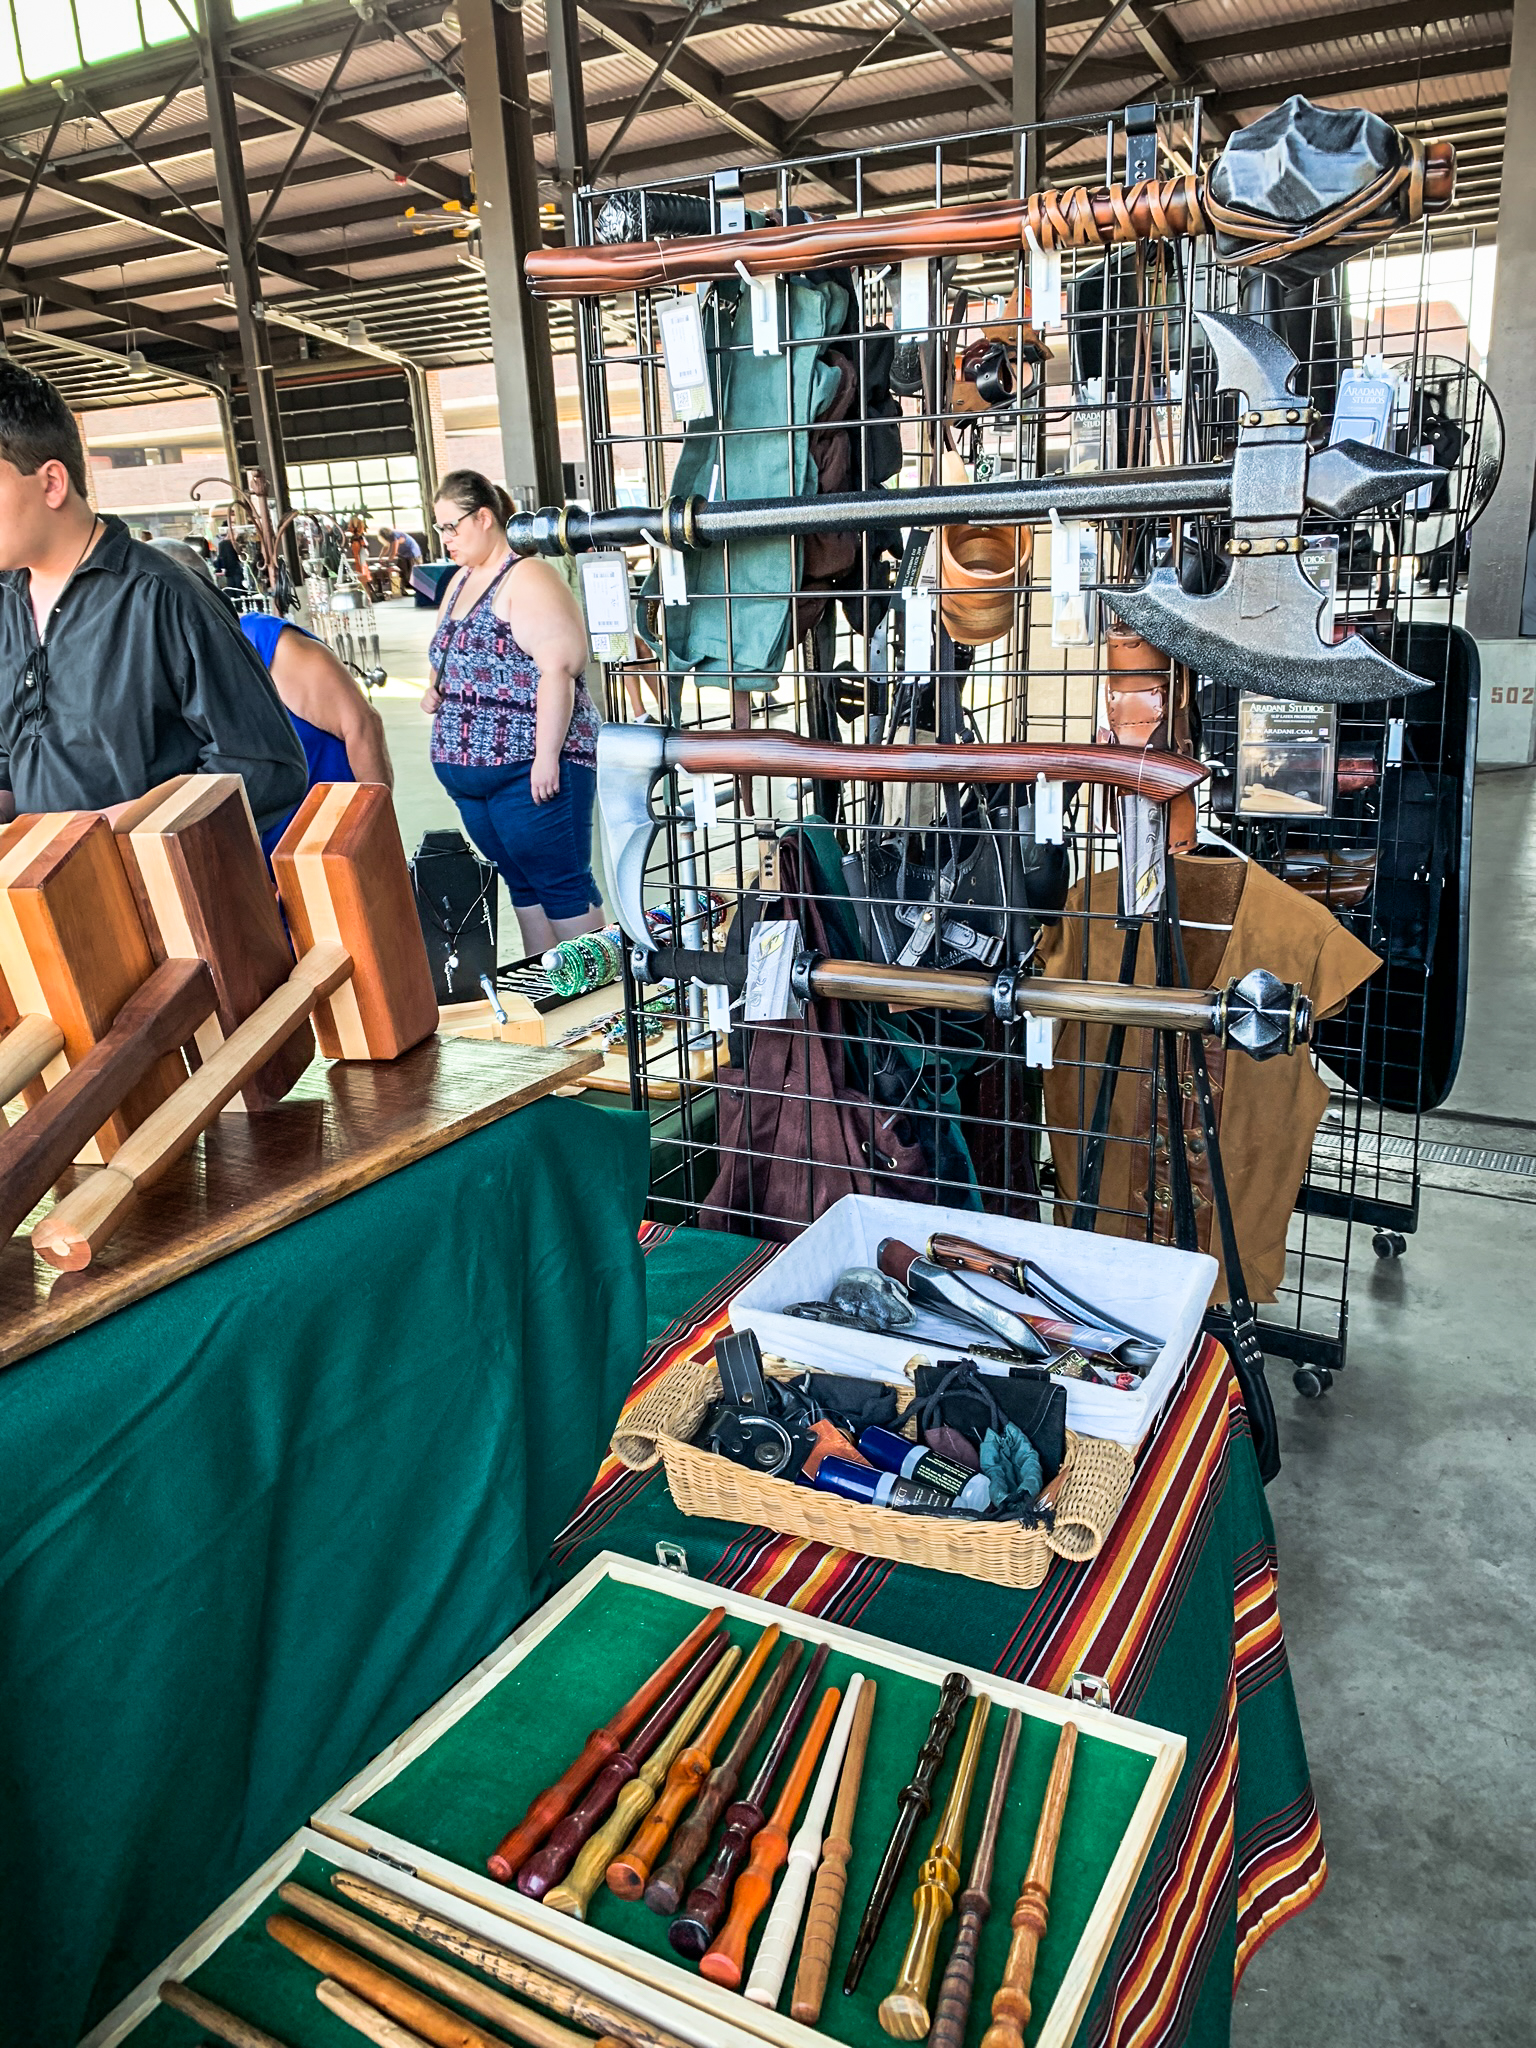 eastern market with wooden wands, epic armoury weapons, mace, axe, throwing knives, leathergoods and more